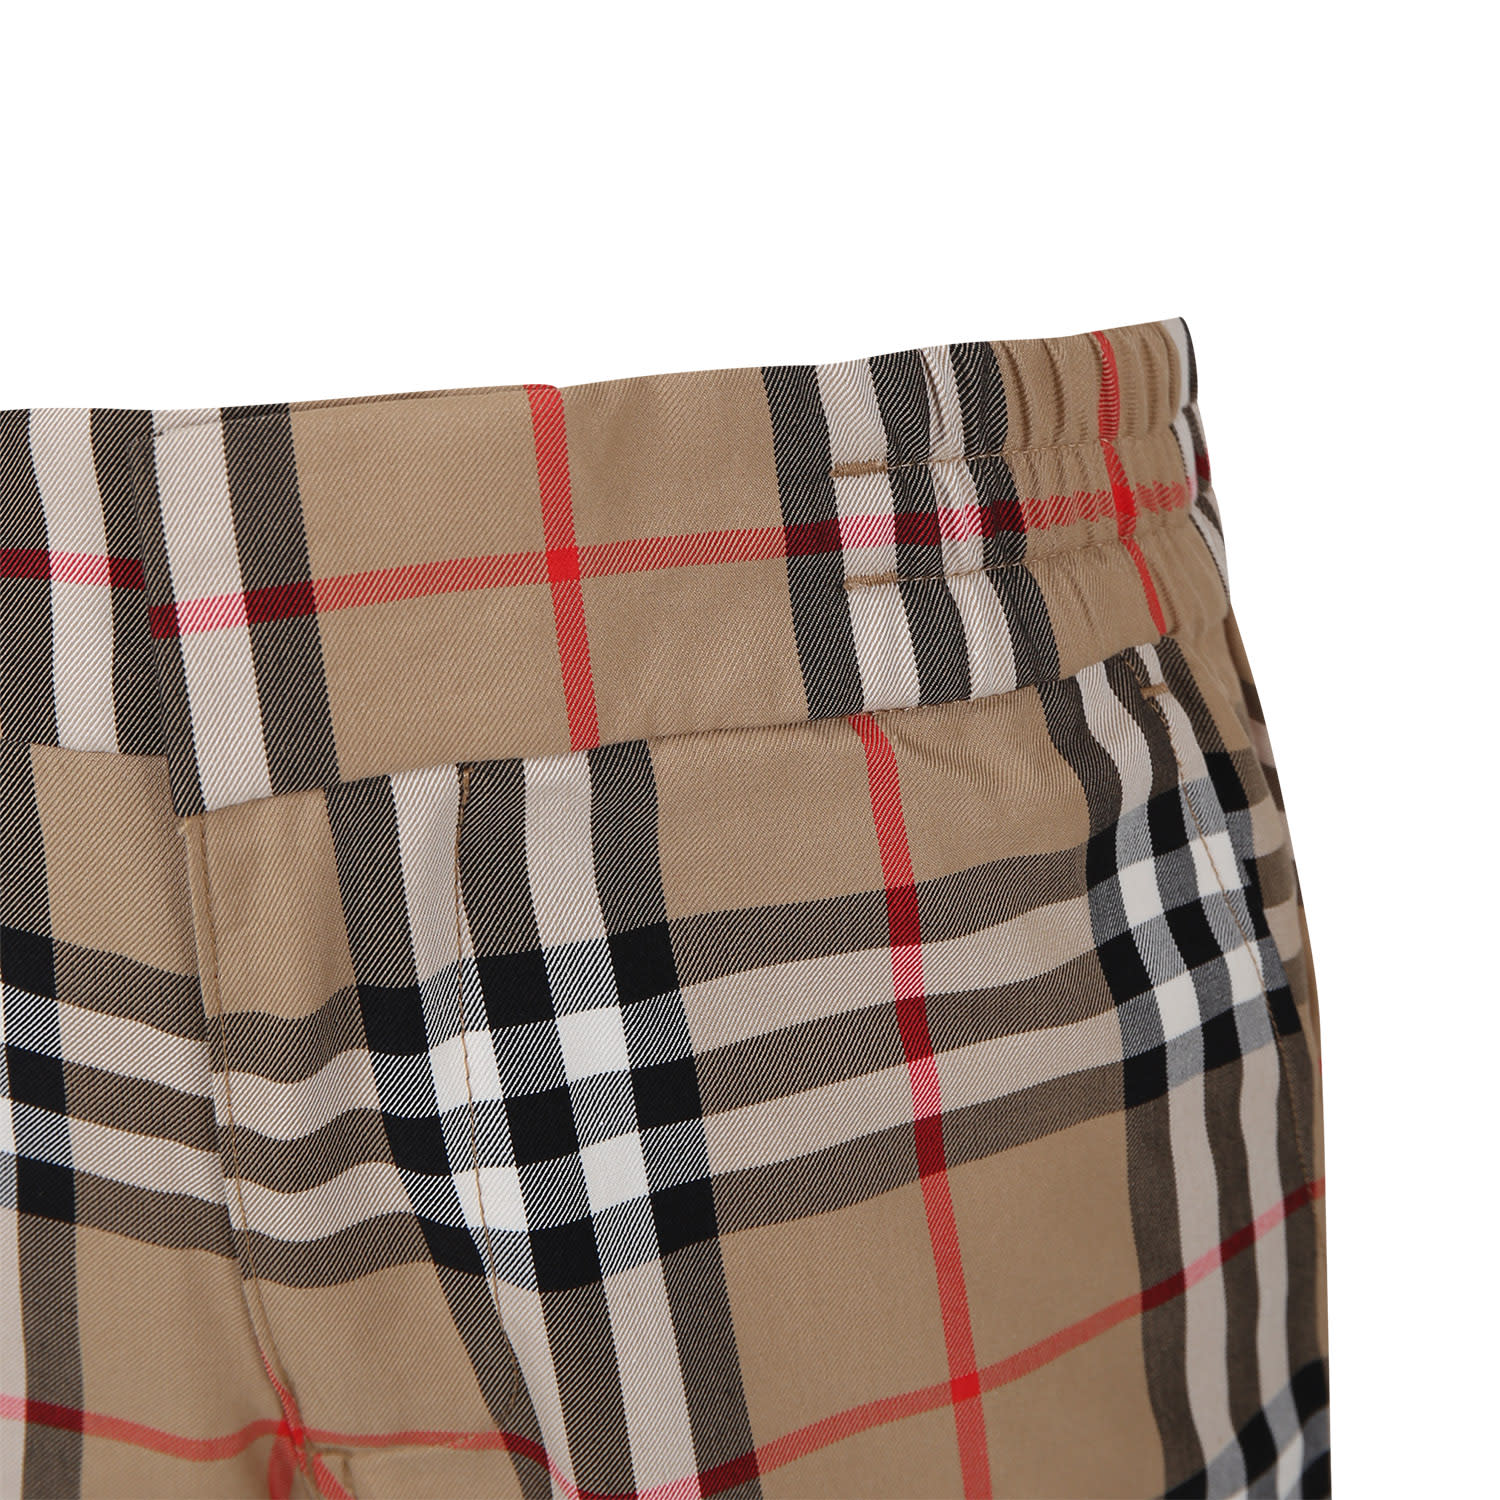 Shop Burberry Beige Shorts For Boy With Iconic All-over Vintage Check